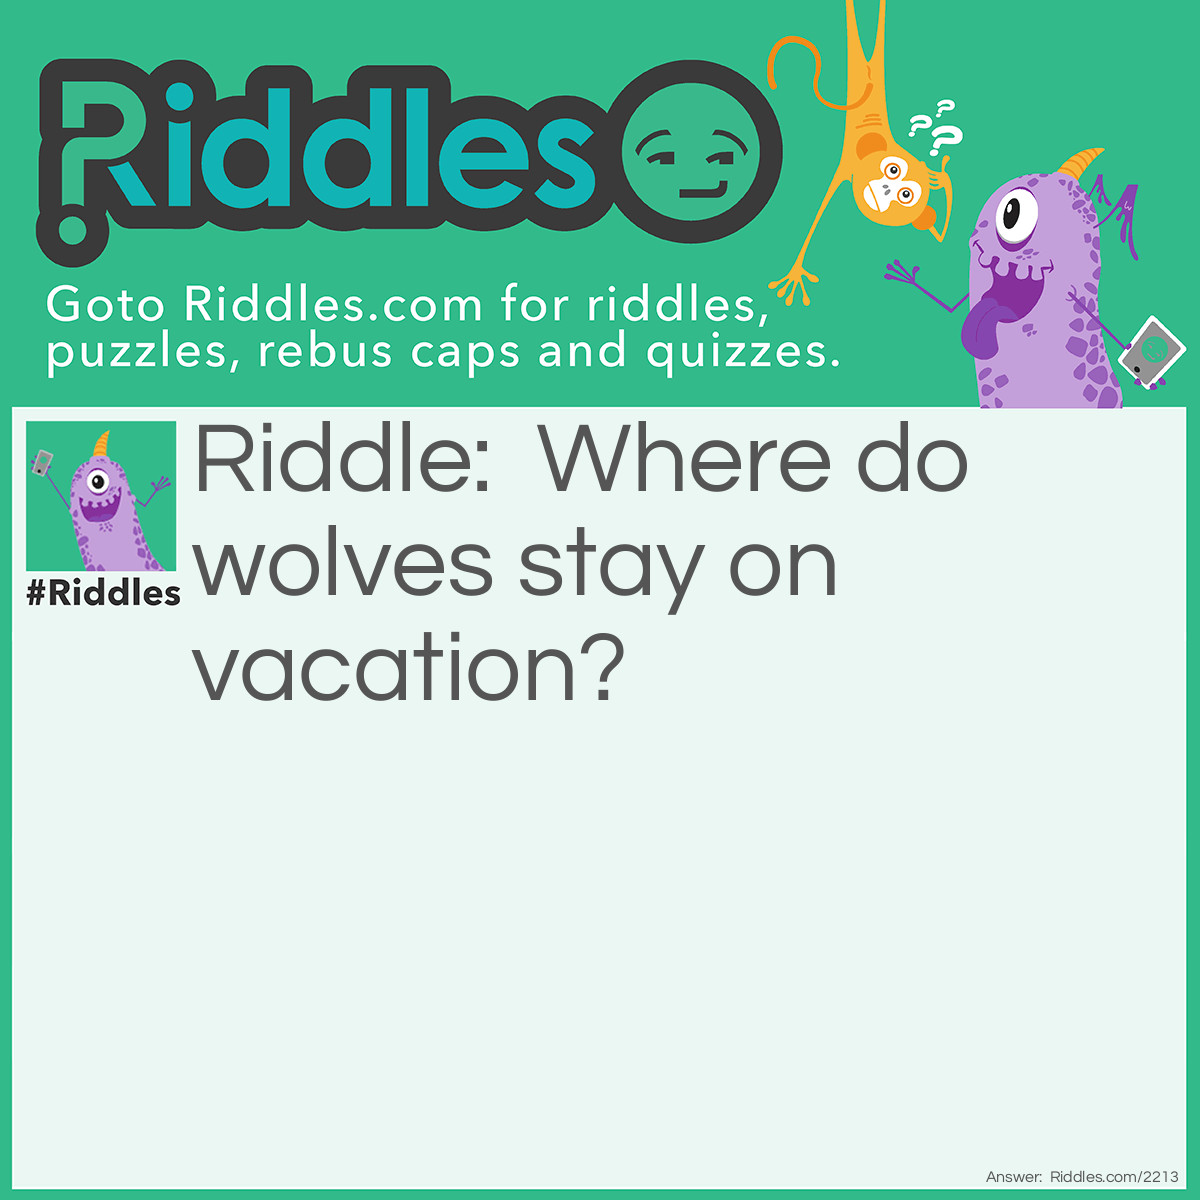 Riddle: Where do wolves stay on vacation? Answer: At a howliday inn.